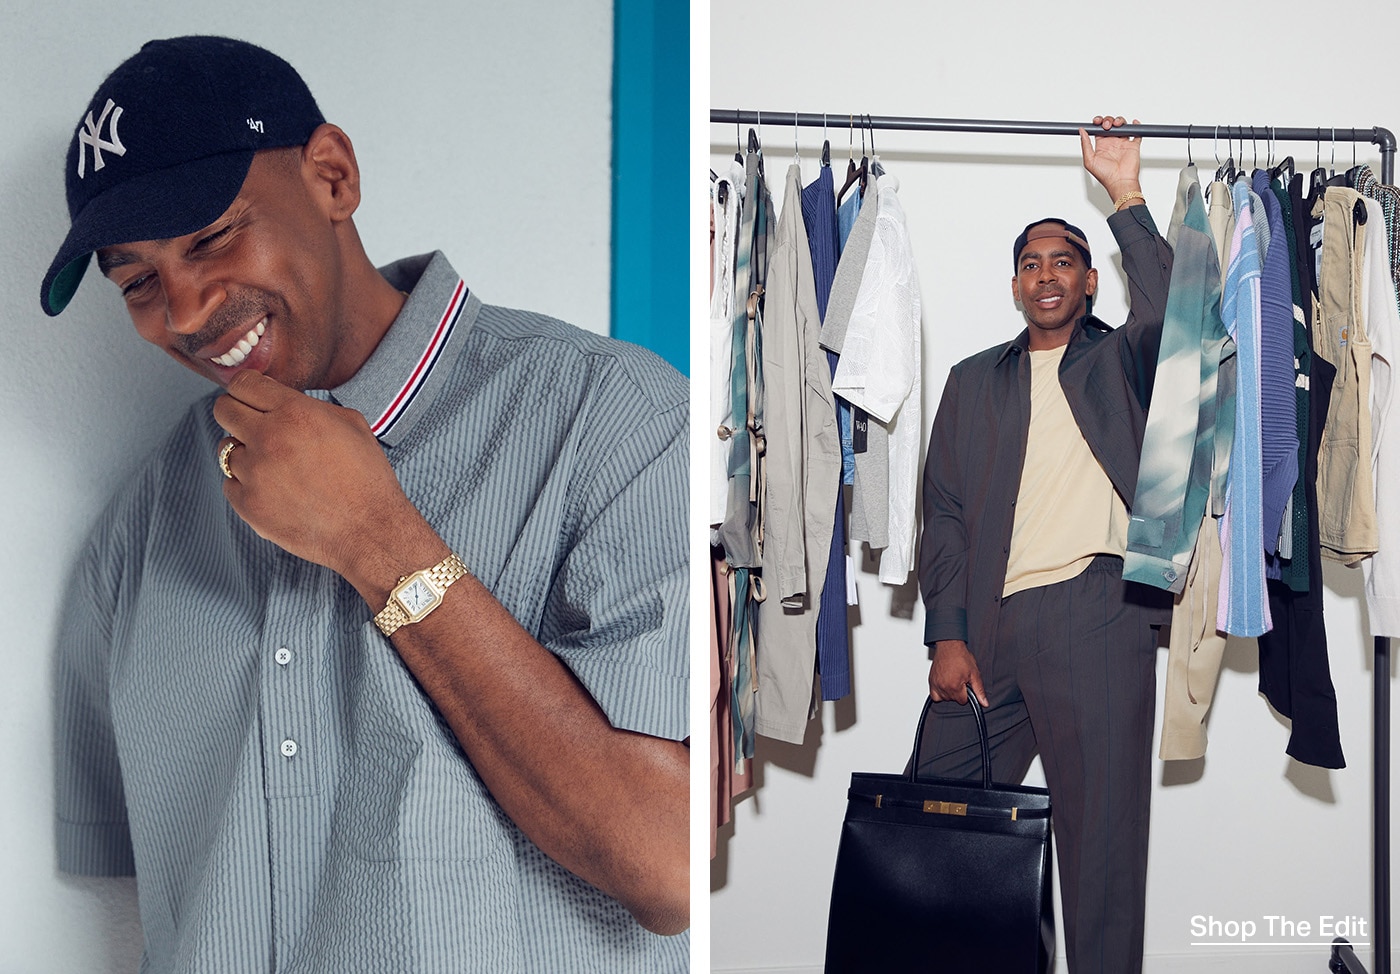 Two images of Jason Bolden smiling and posing under a clothes rack holding a Saint Laurent bag.